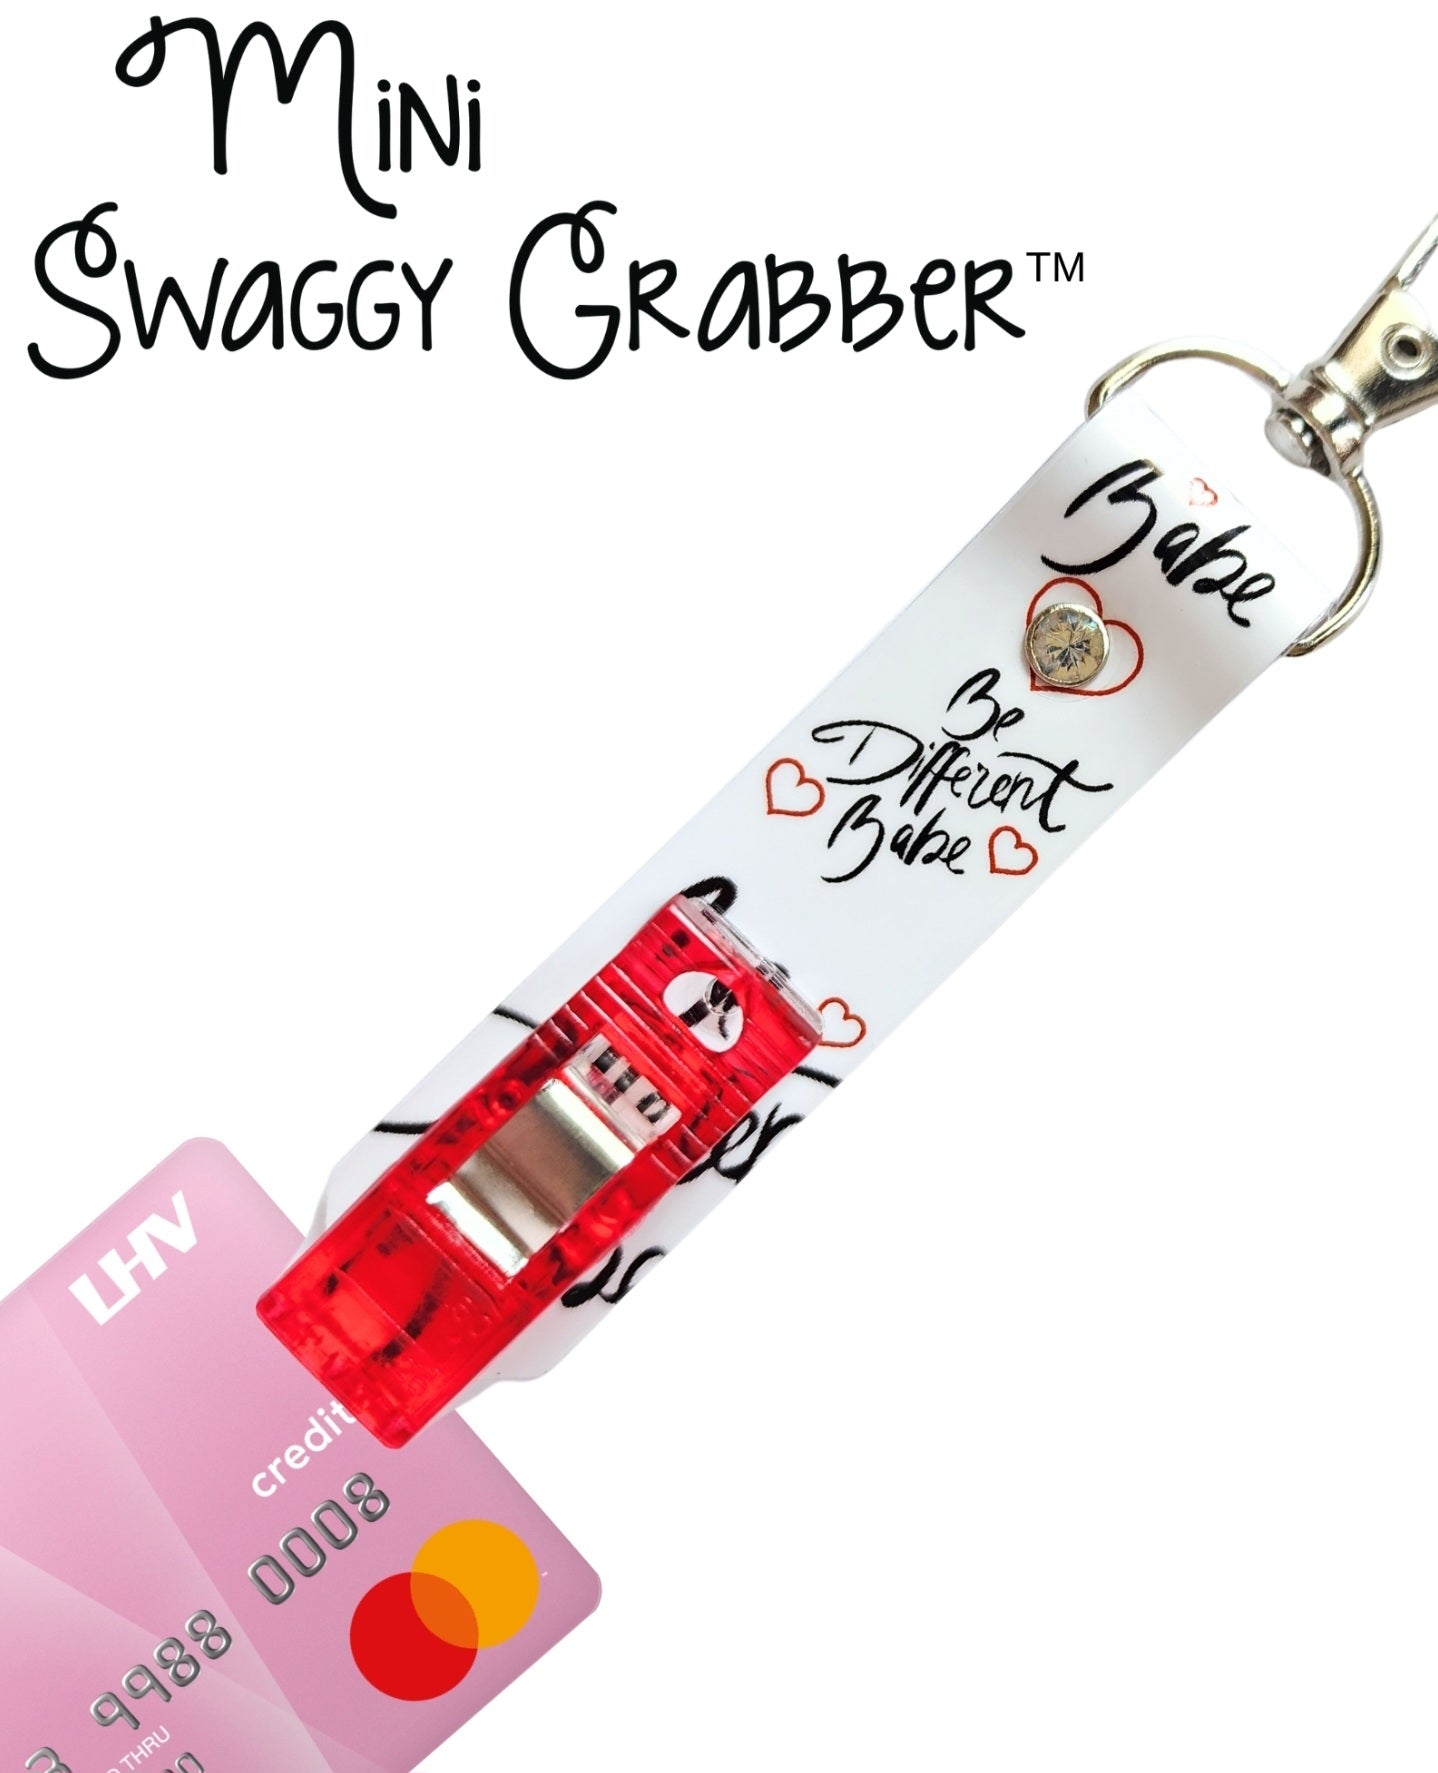 5-in-1 Jewelry Helper Tool & Original Card Grabber The Mini Swaggy Gra –  SWAGGY TAGS™️☆ SWAGGY GRABBER™️